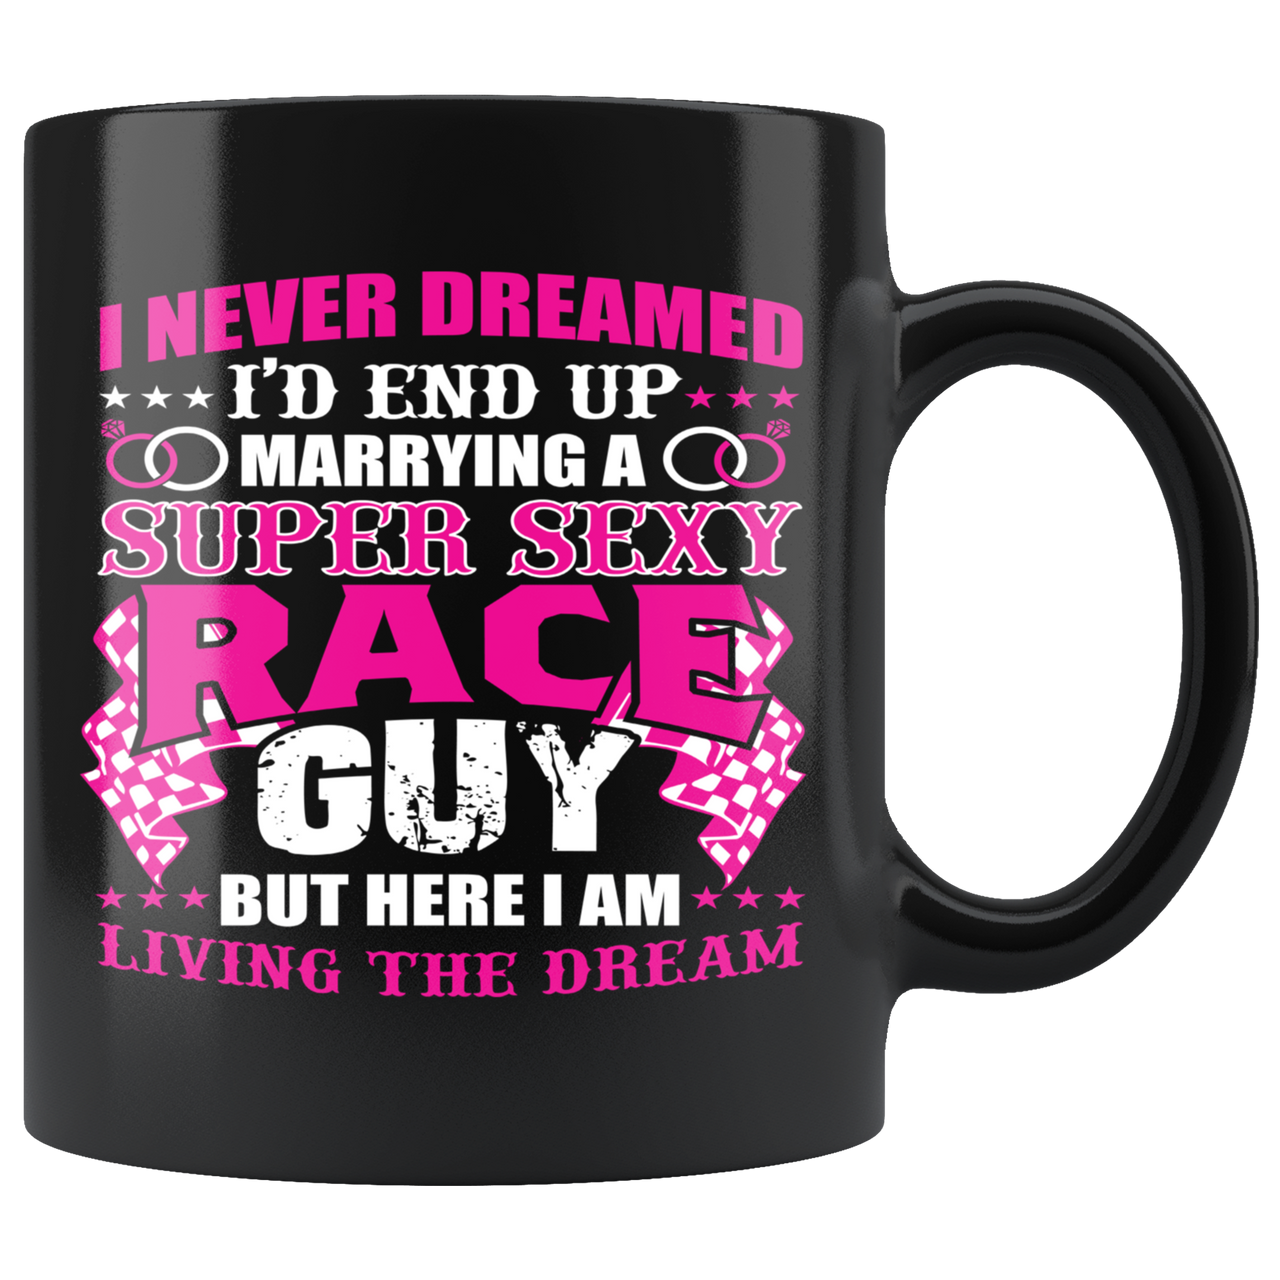 I Never Dreamed I'll End Up Marrying A Super Sexy Race Guy Mug!